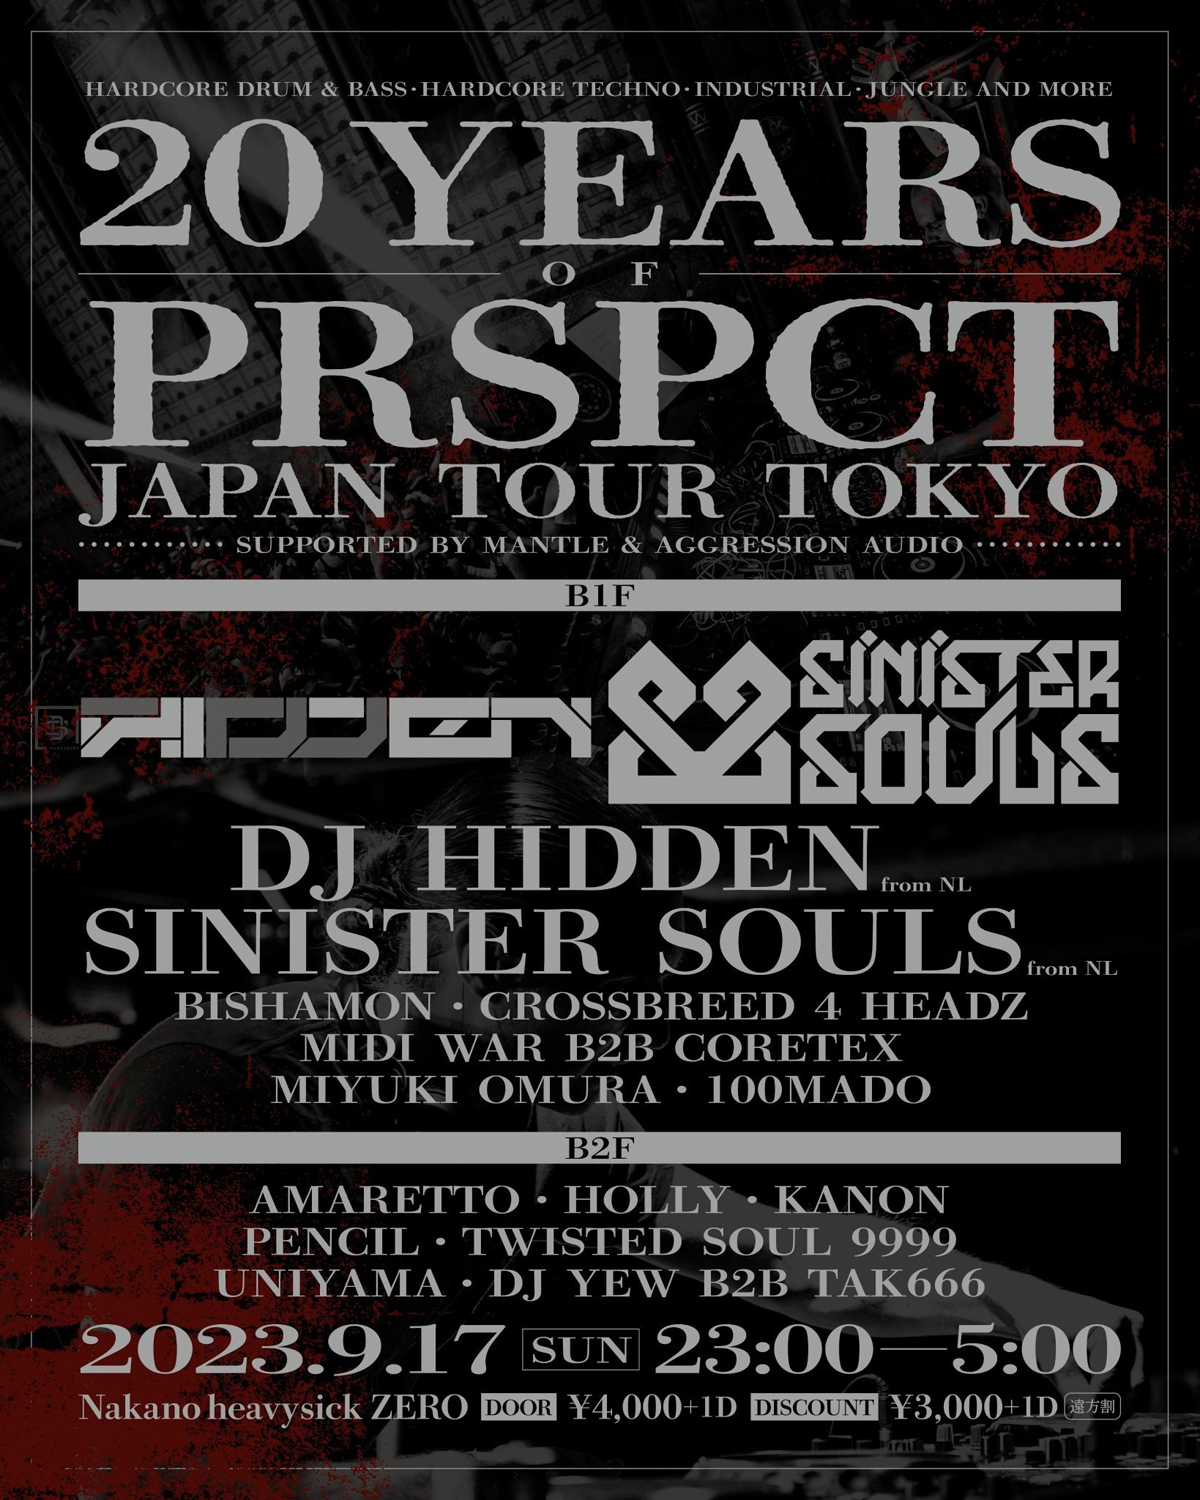 20 Years of PRSPCT Japan Tour Tokyo Supported by MANTLE & Aggression Audio